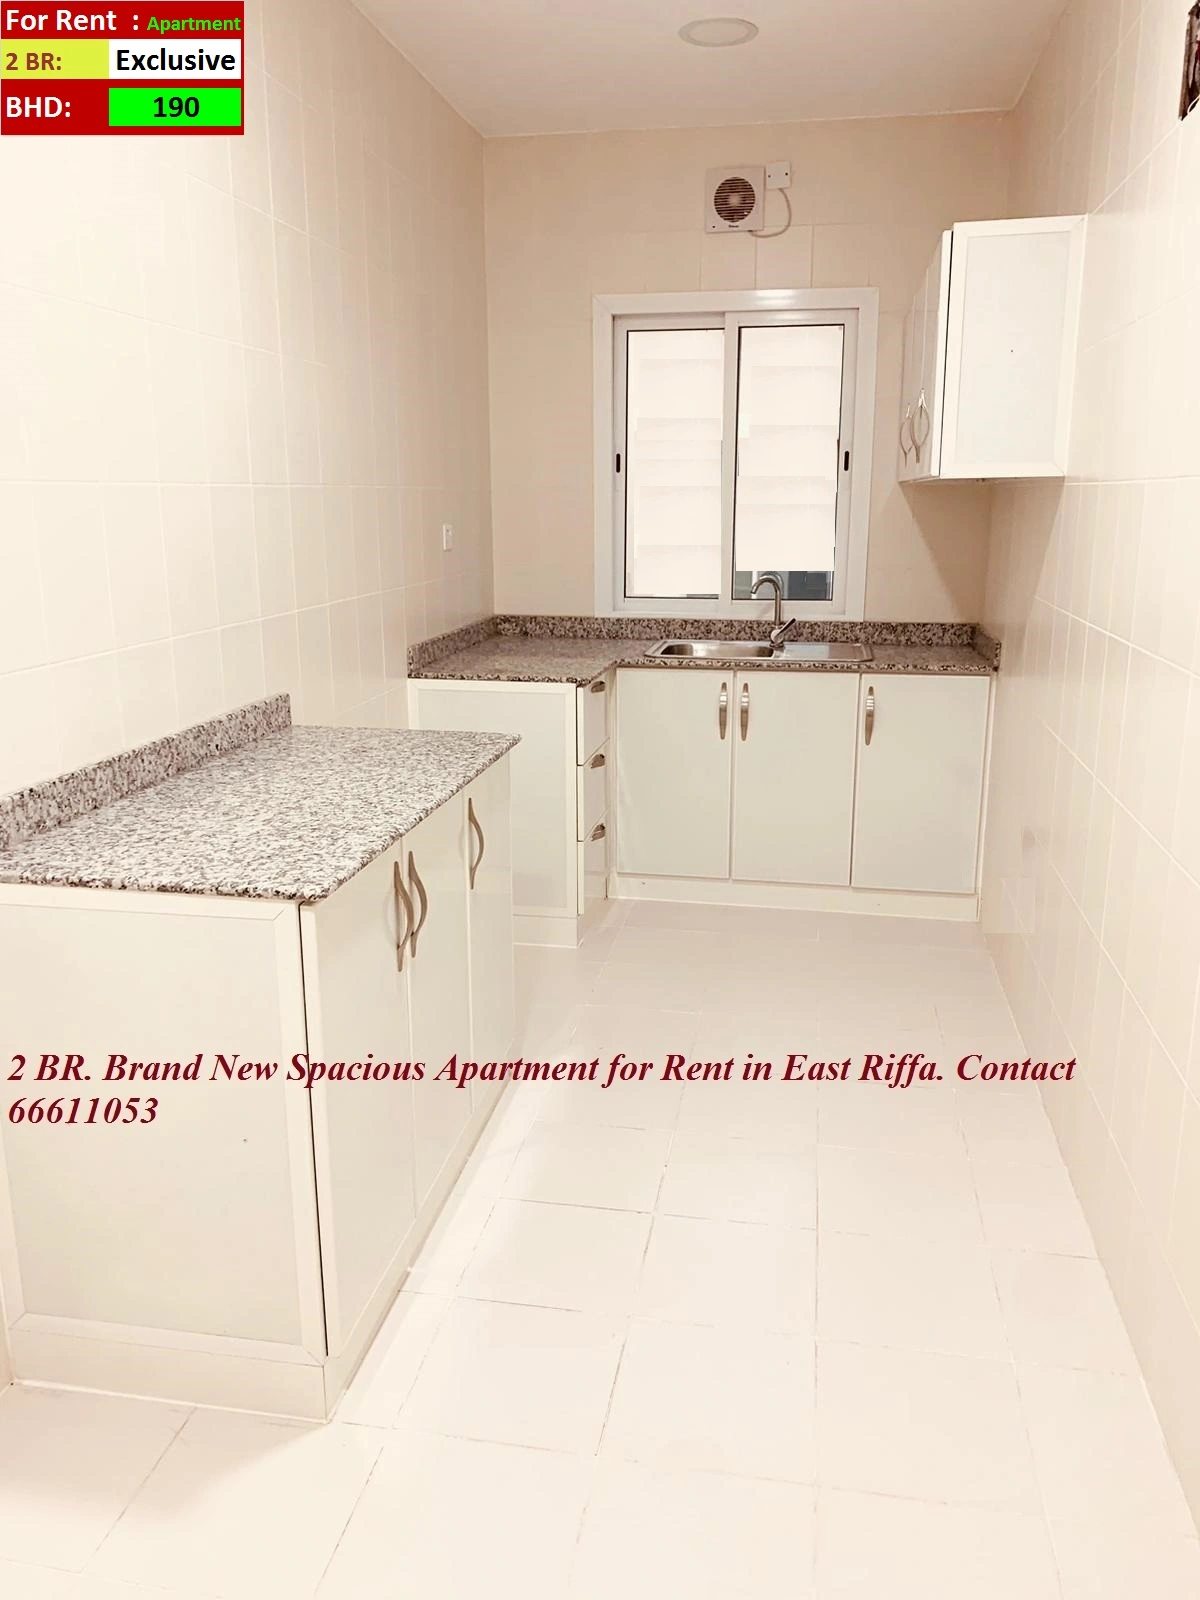 2 BR. Brand New Spacious Apartment for Rent in East Riffa